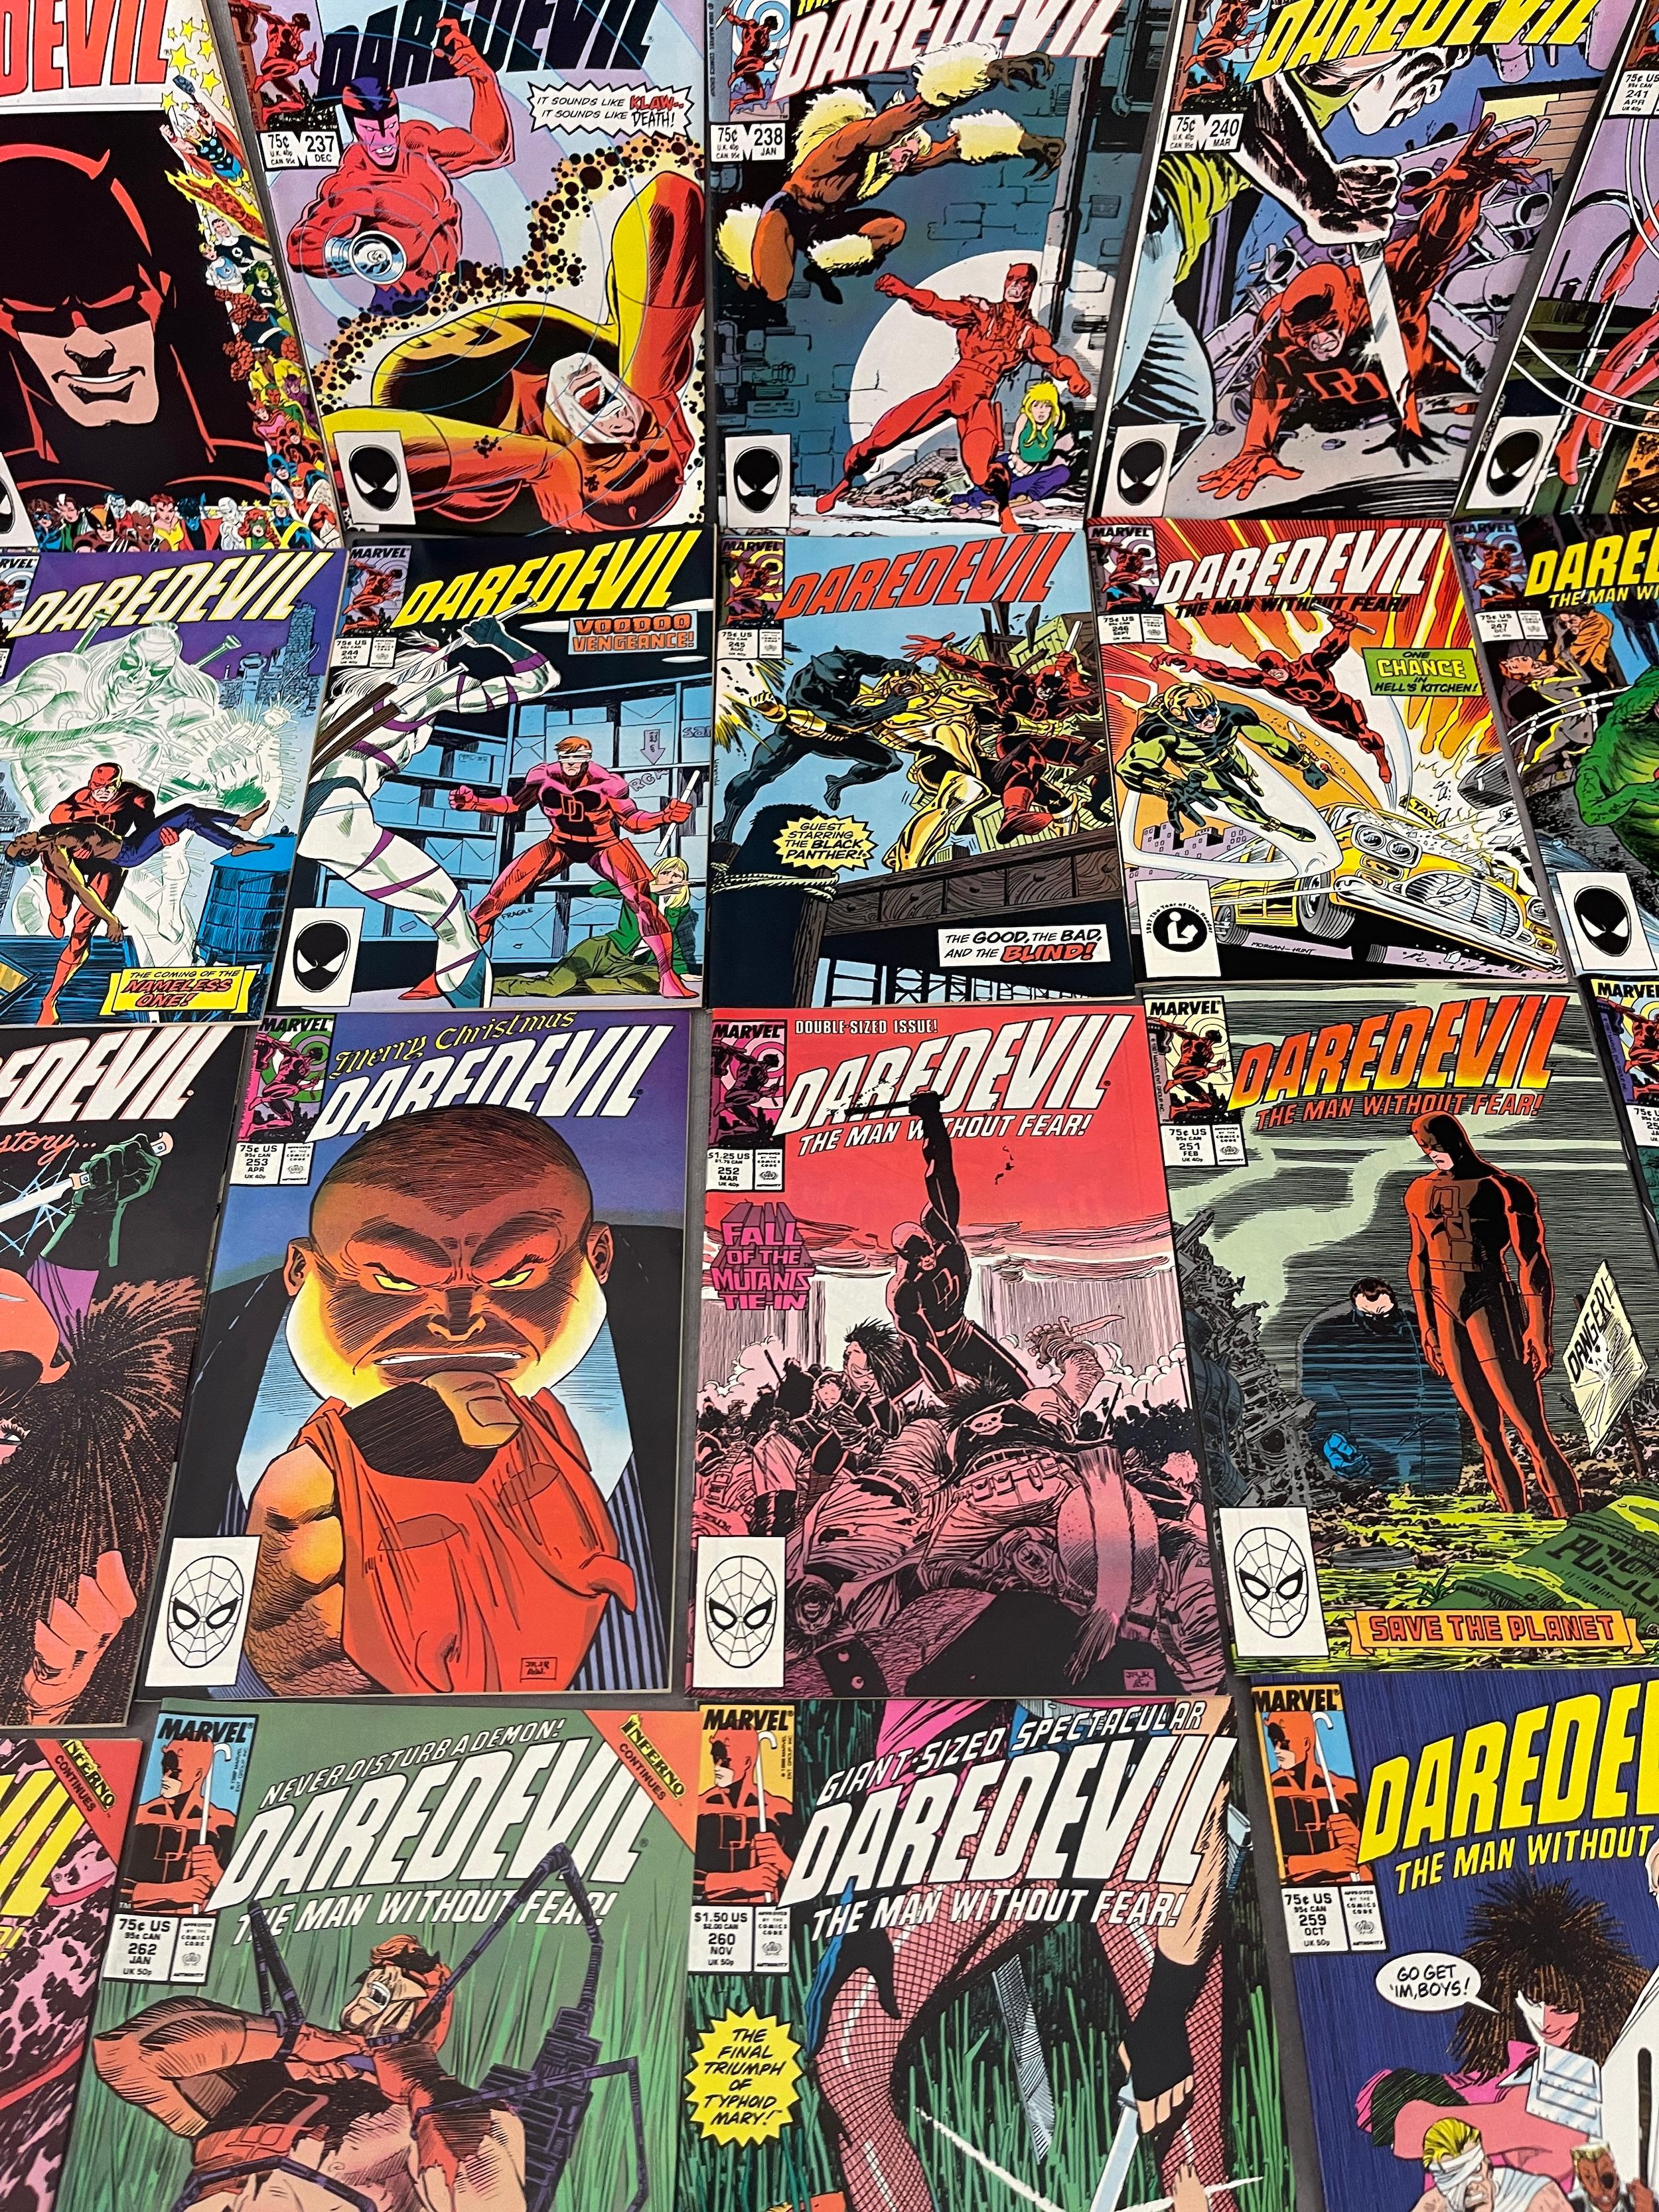 Daredevil Marvel Comic Book Collection Lot of 25